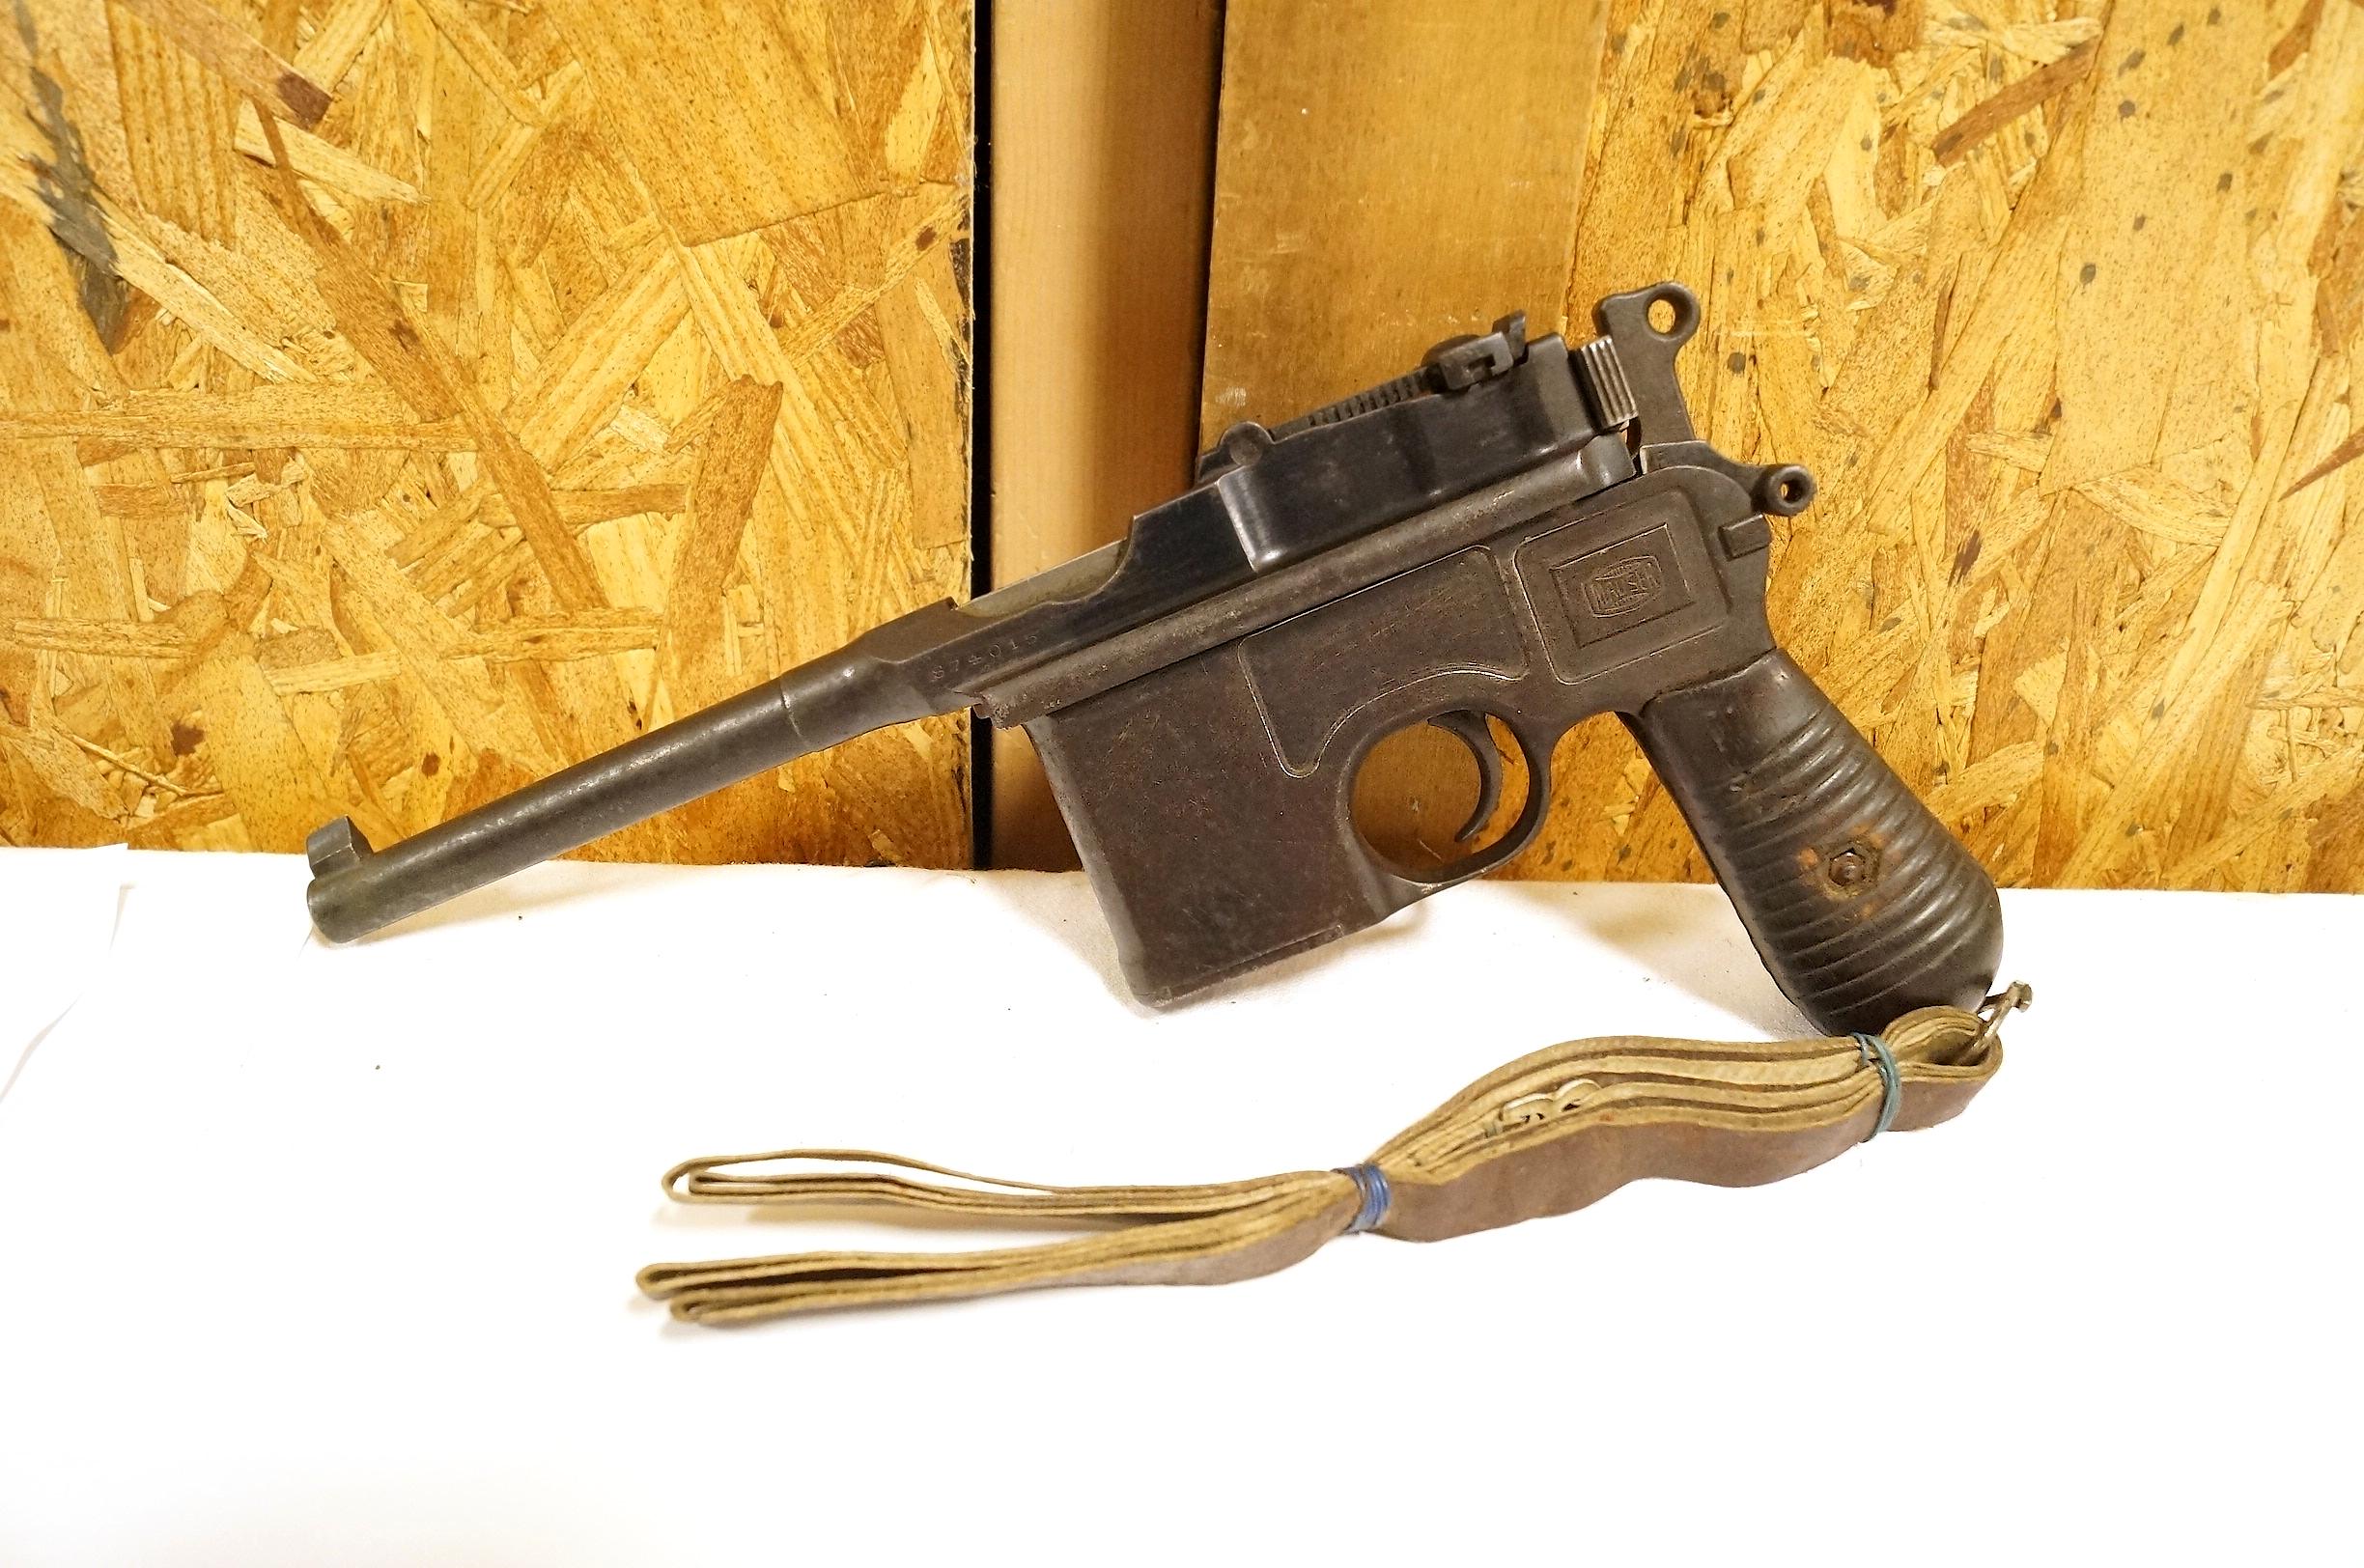 Mauser Model 1930 Commercial Broomhandle Pistol with Wood Case Stock